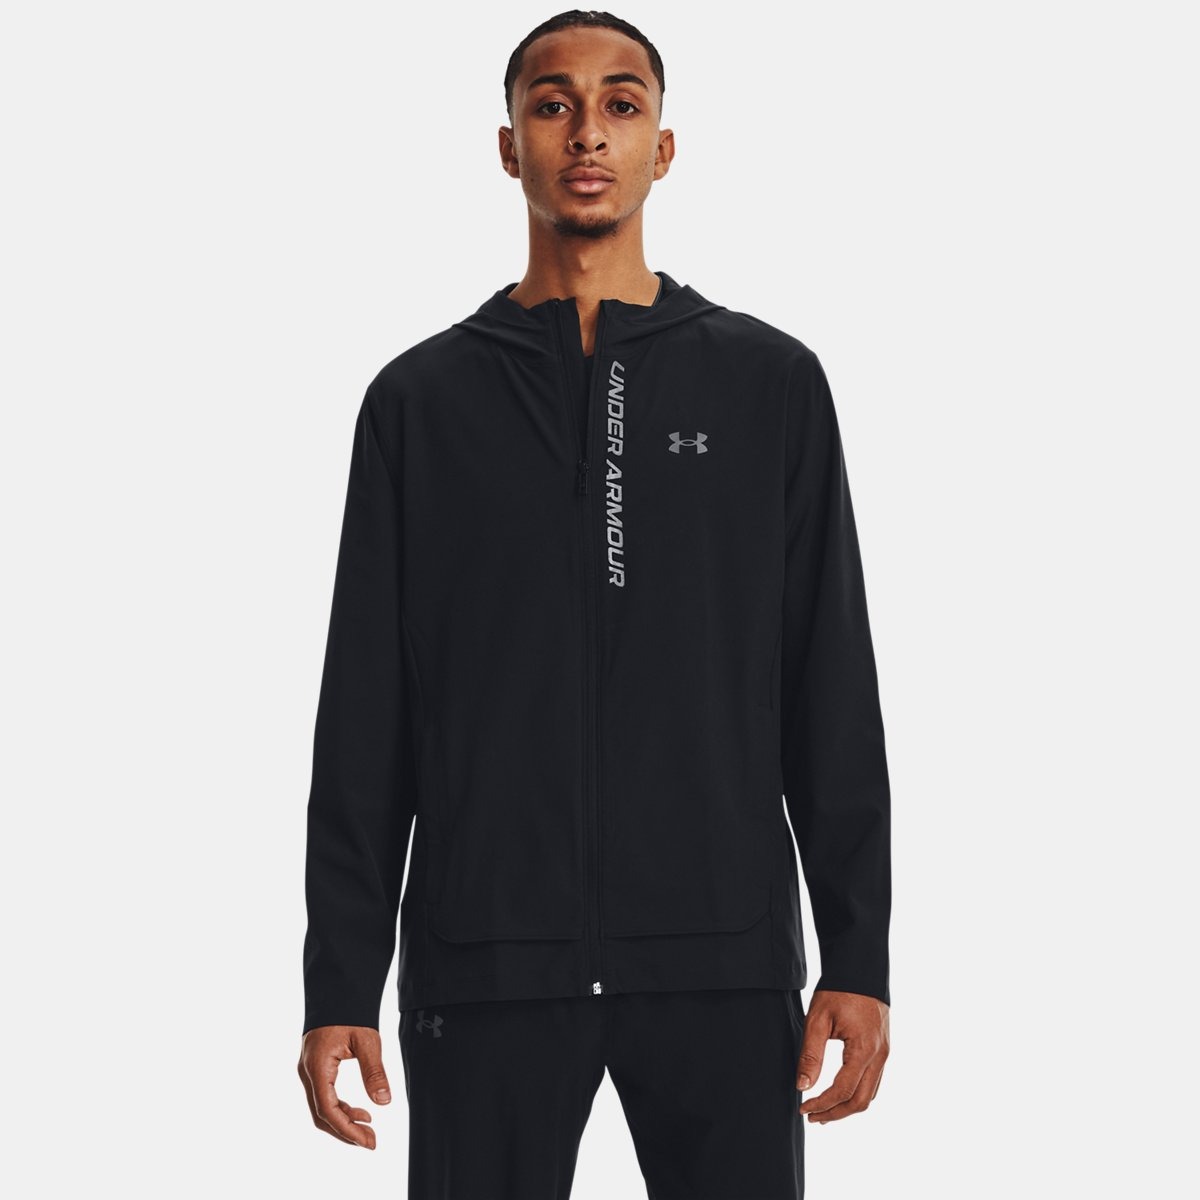 Jacket in Black for Men at Under Armour GOOFASH